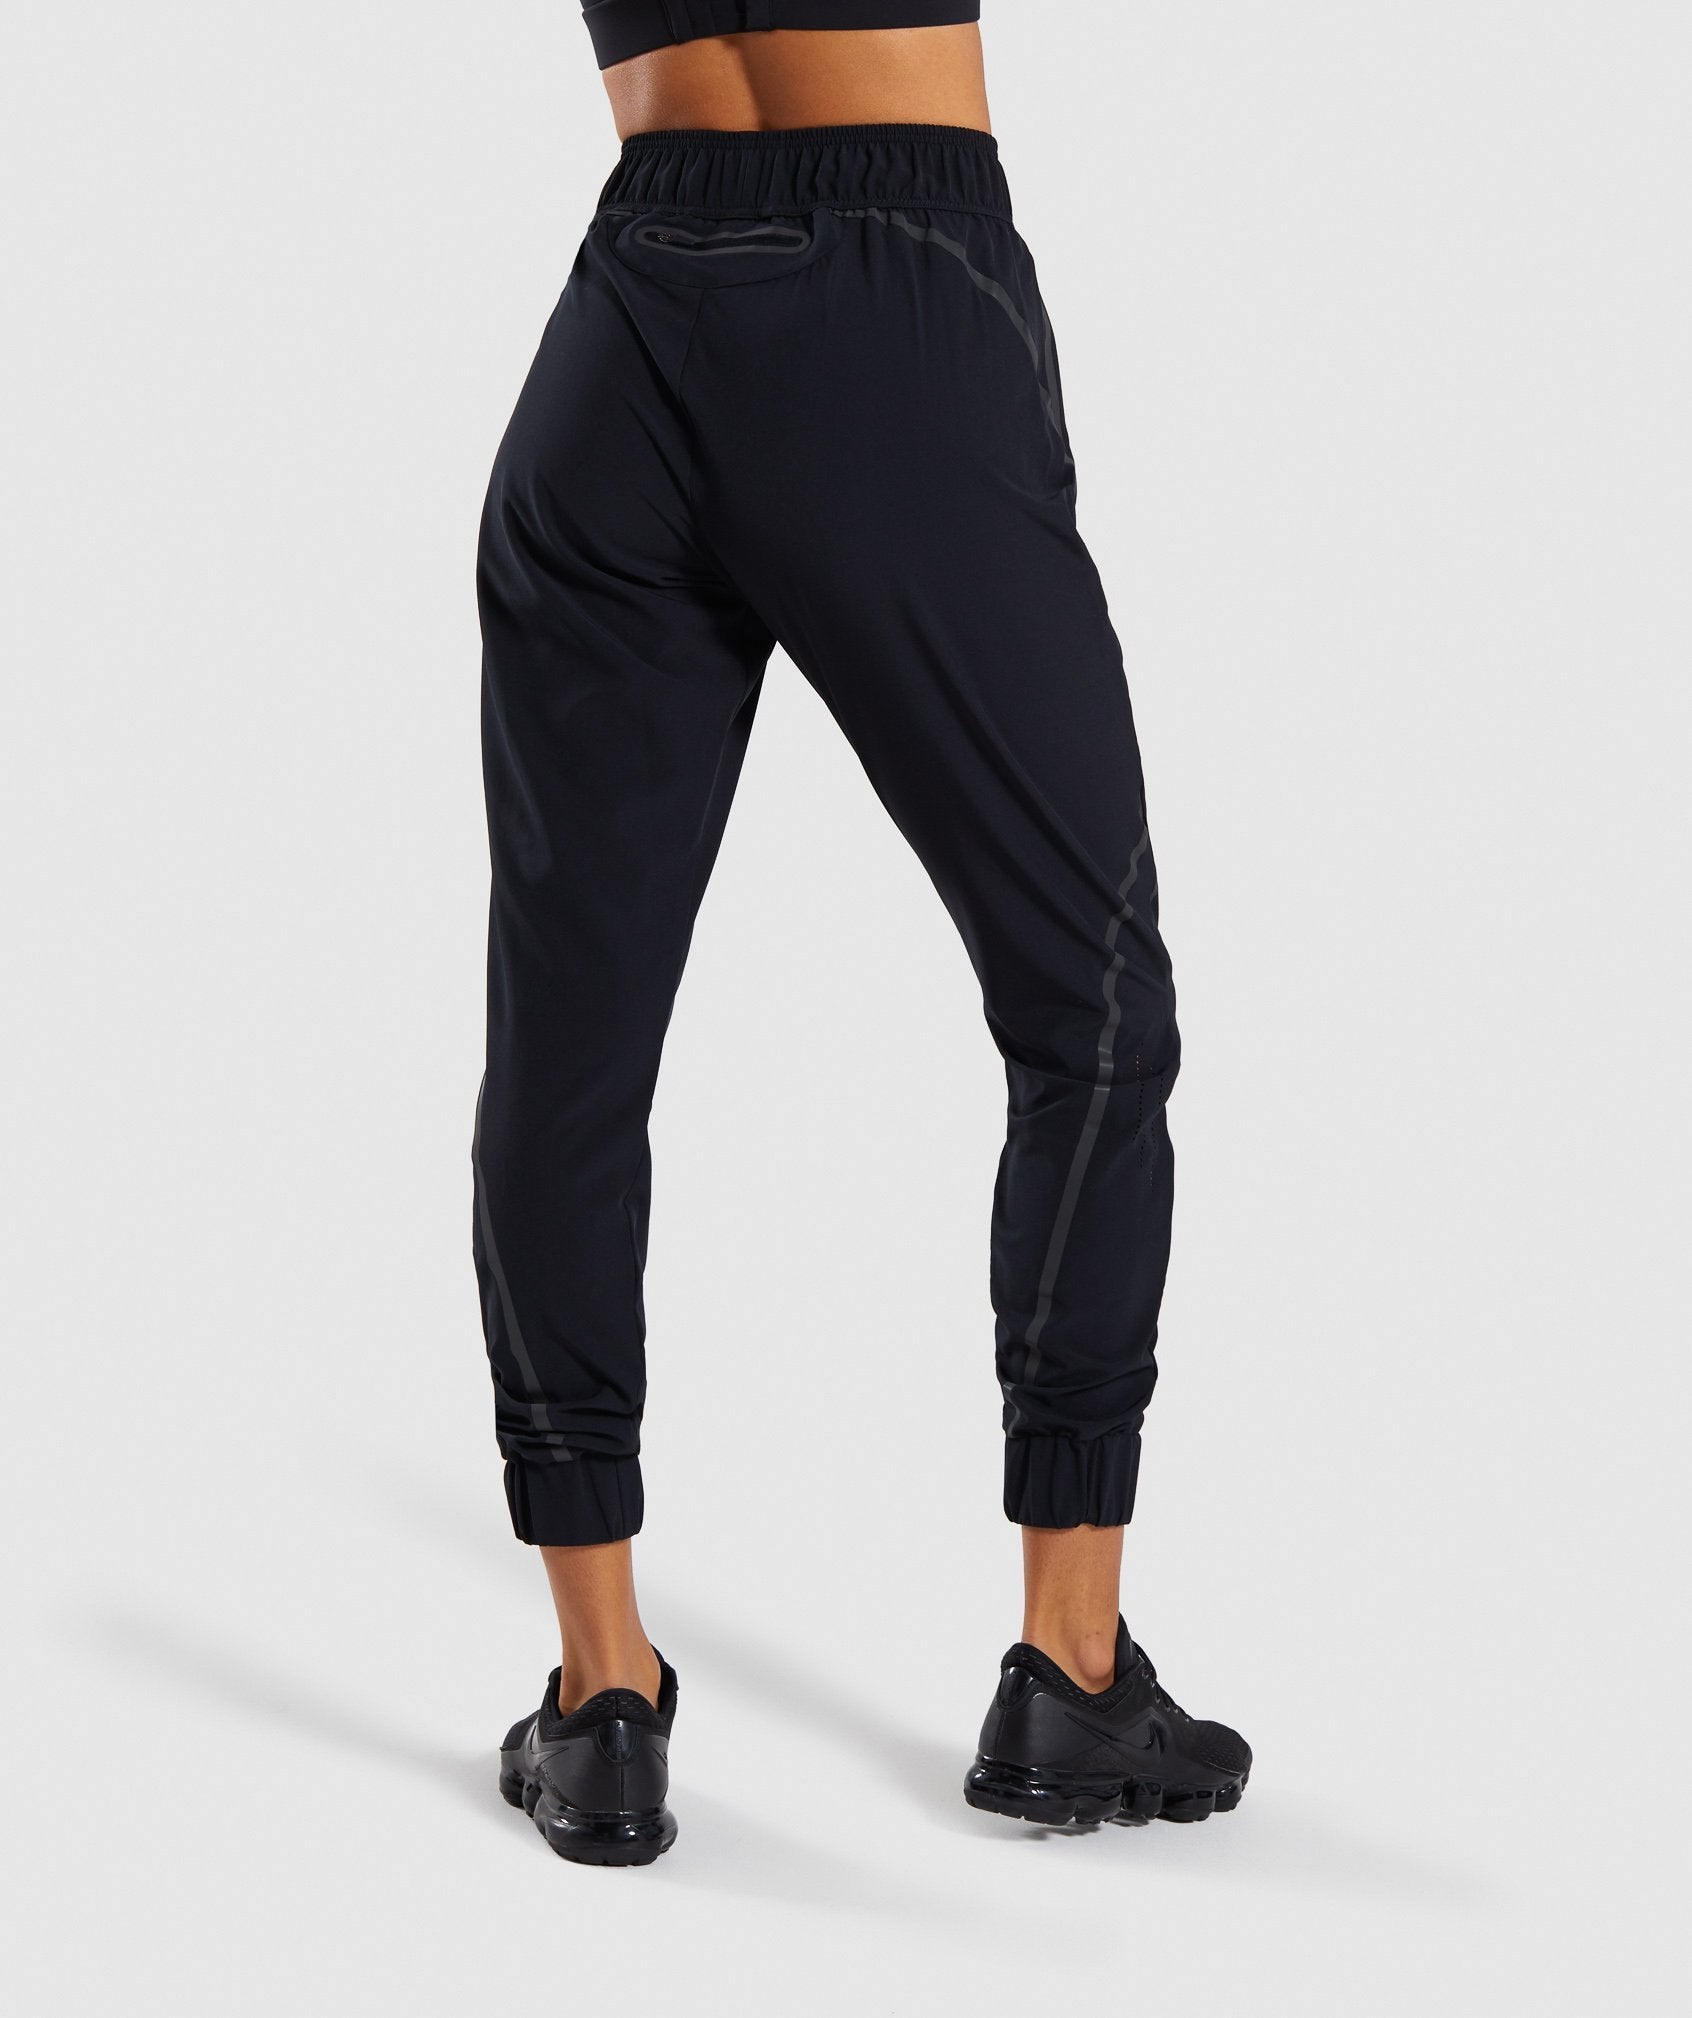 Pro Perform Track Bottoms in Black - view 2